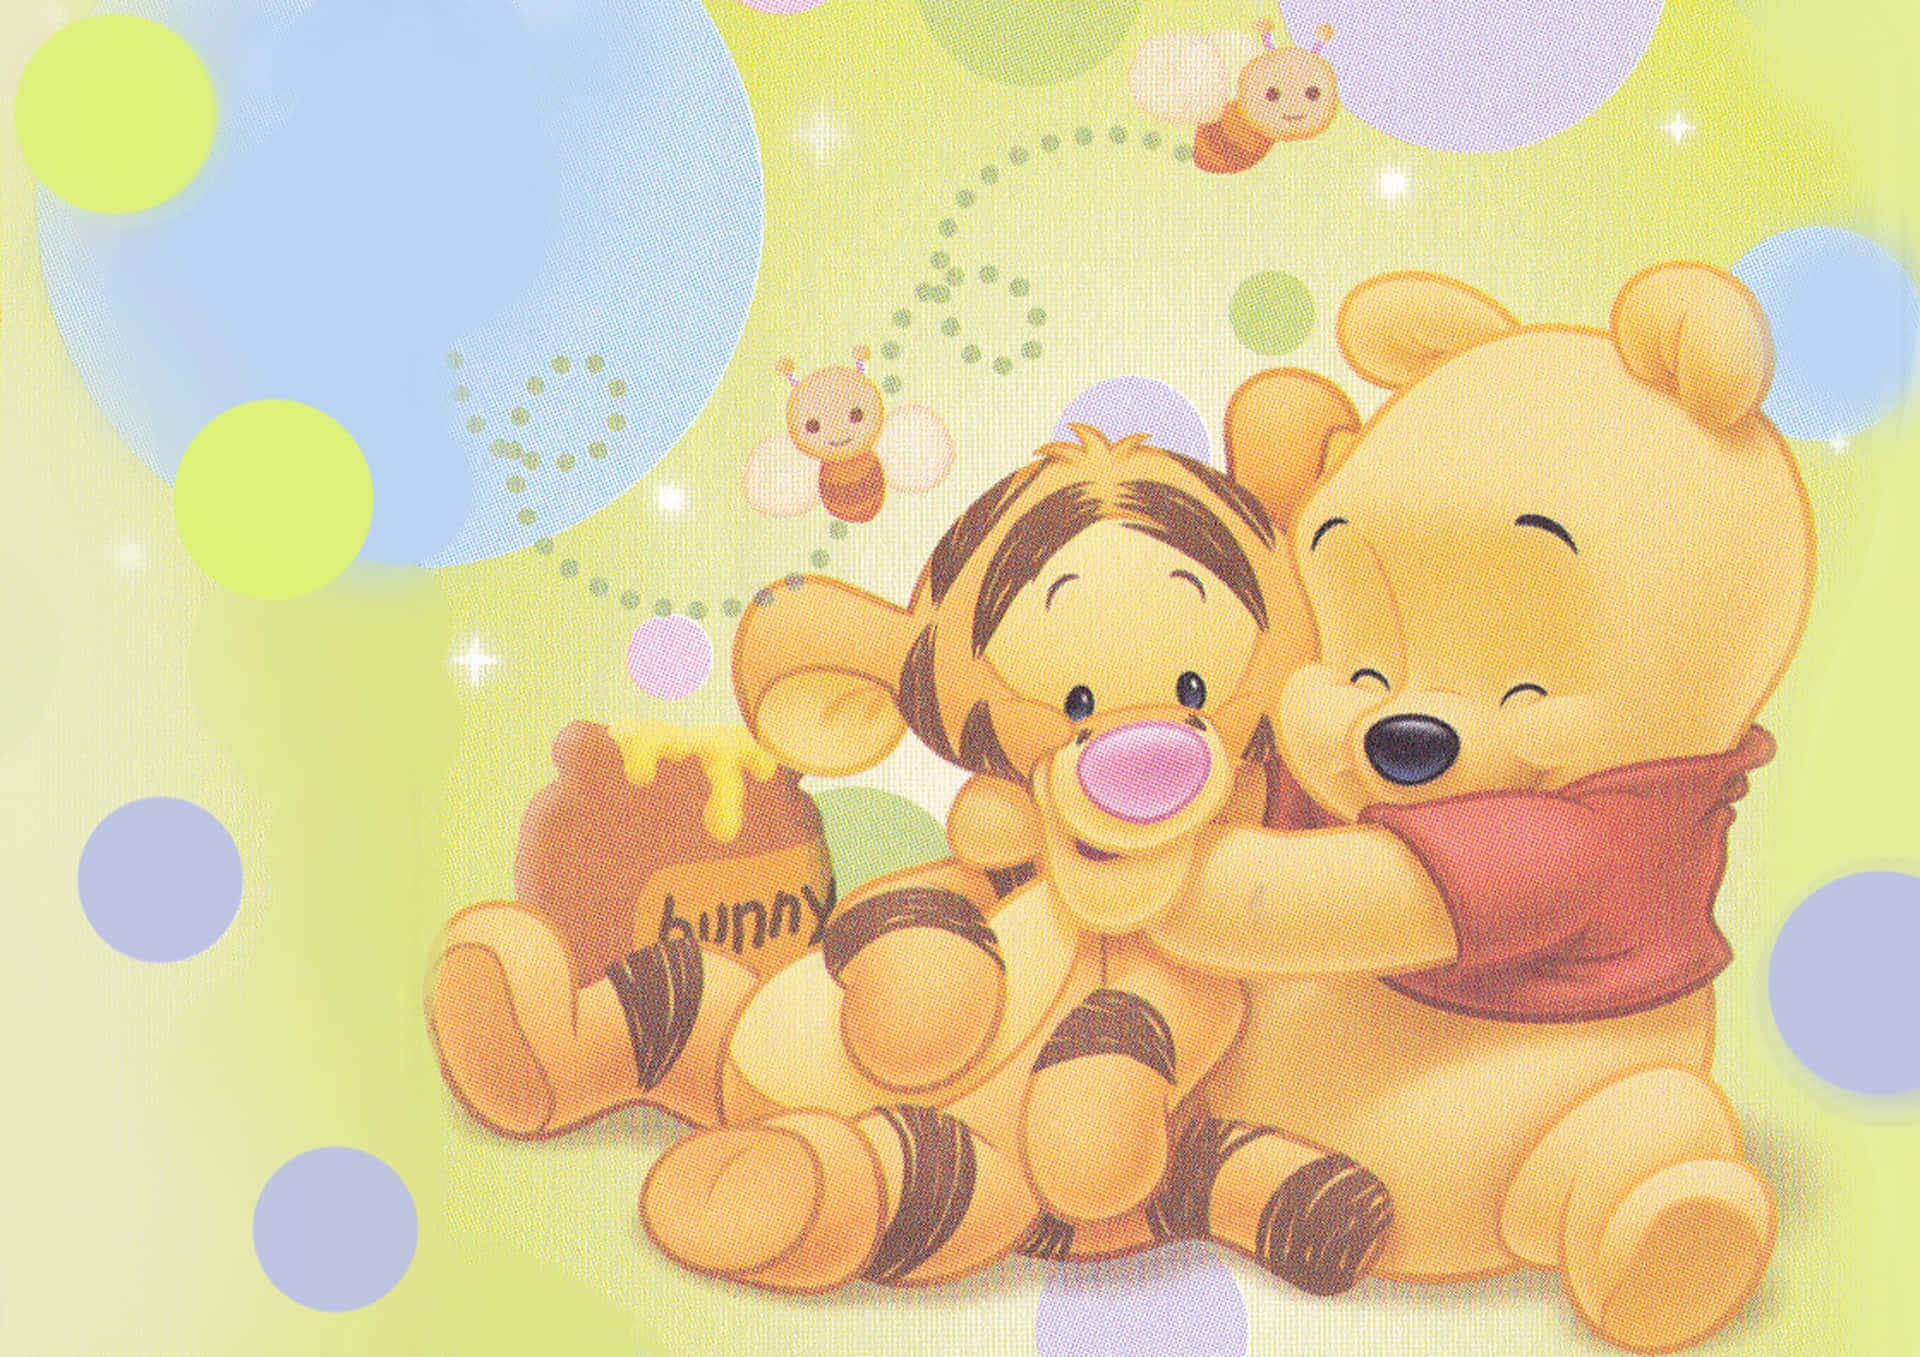 An Adorable Desktop Wallpaper With Winnie The Pooh Background